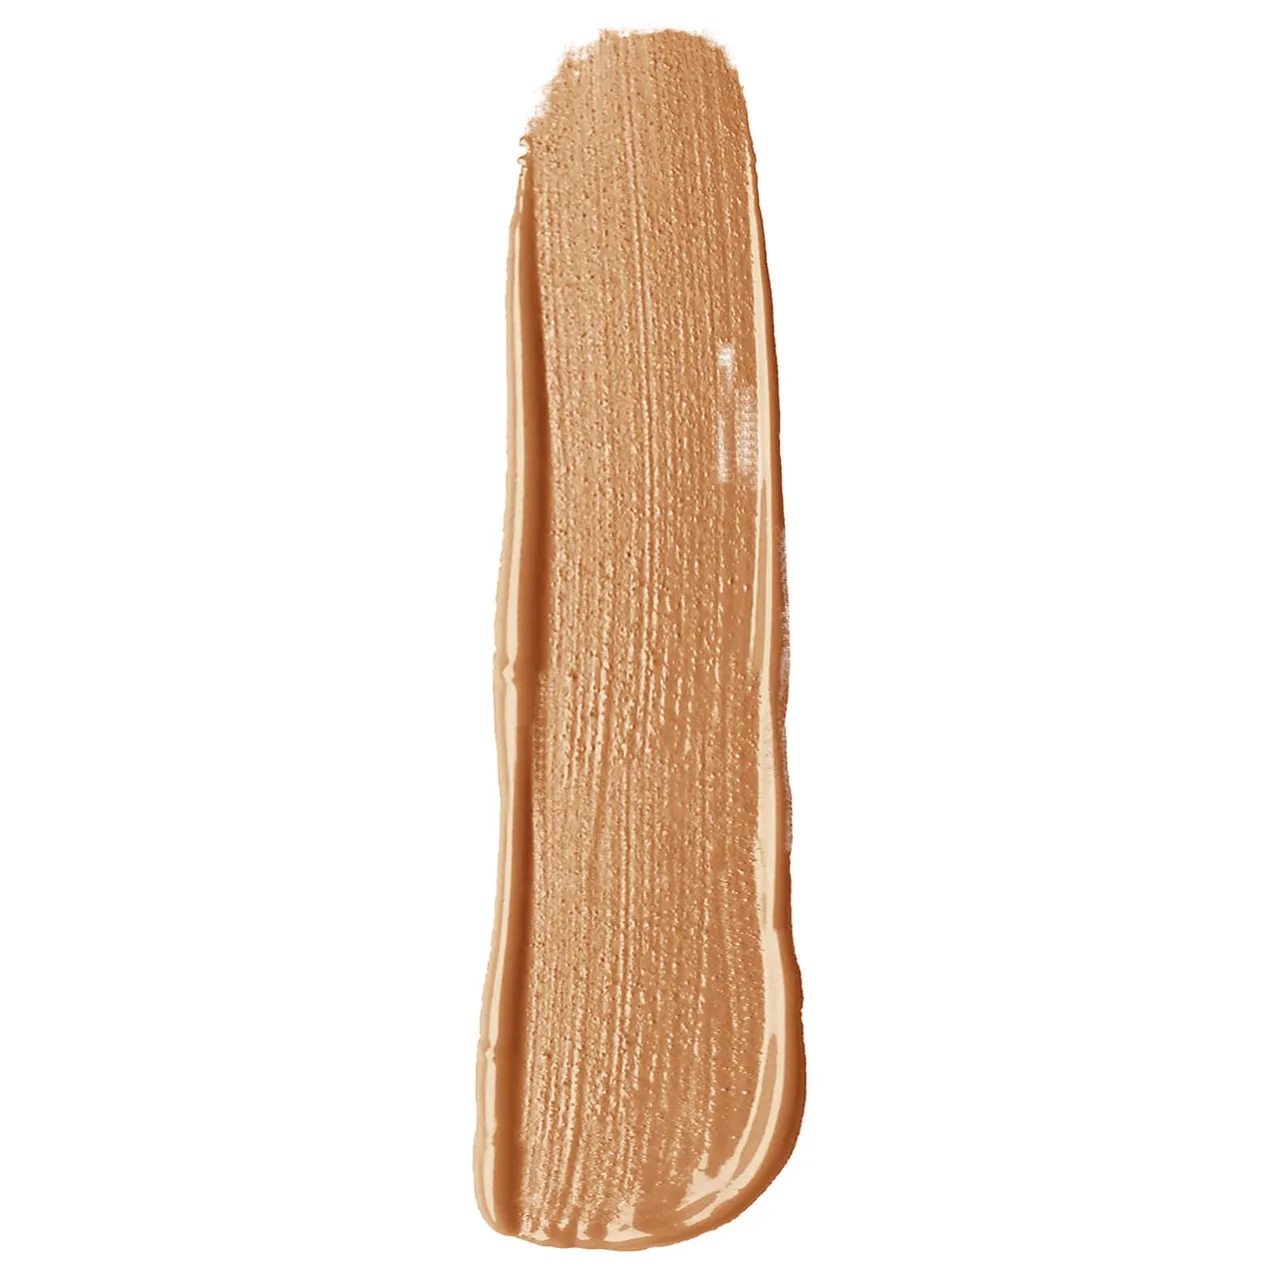 Rimmel Match Perfection Concealer 7ml (Various Shades) - Classic Beige